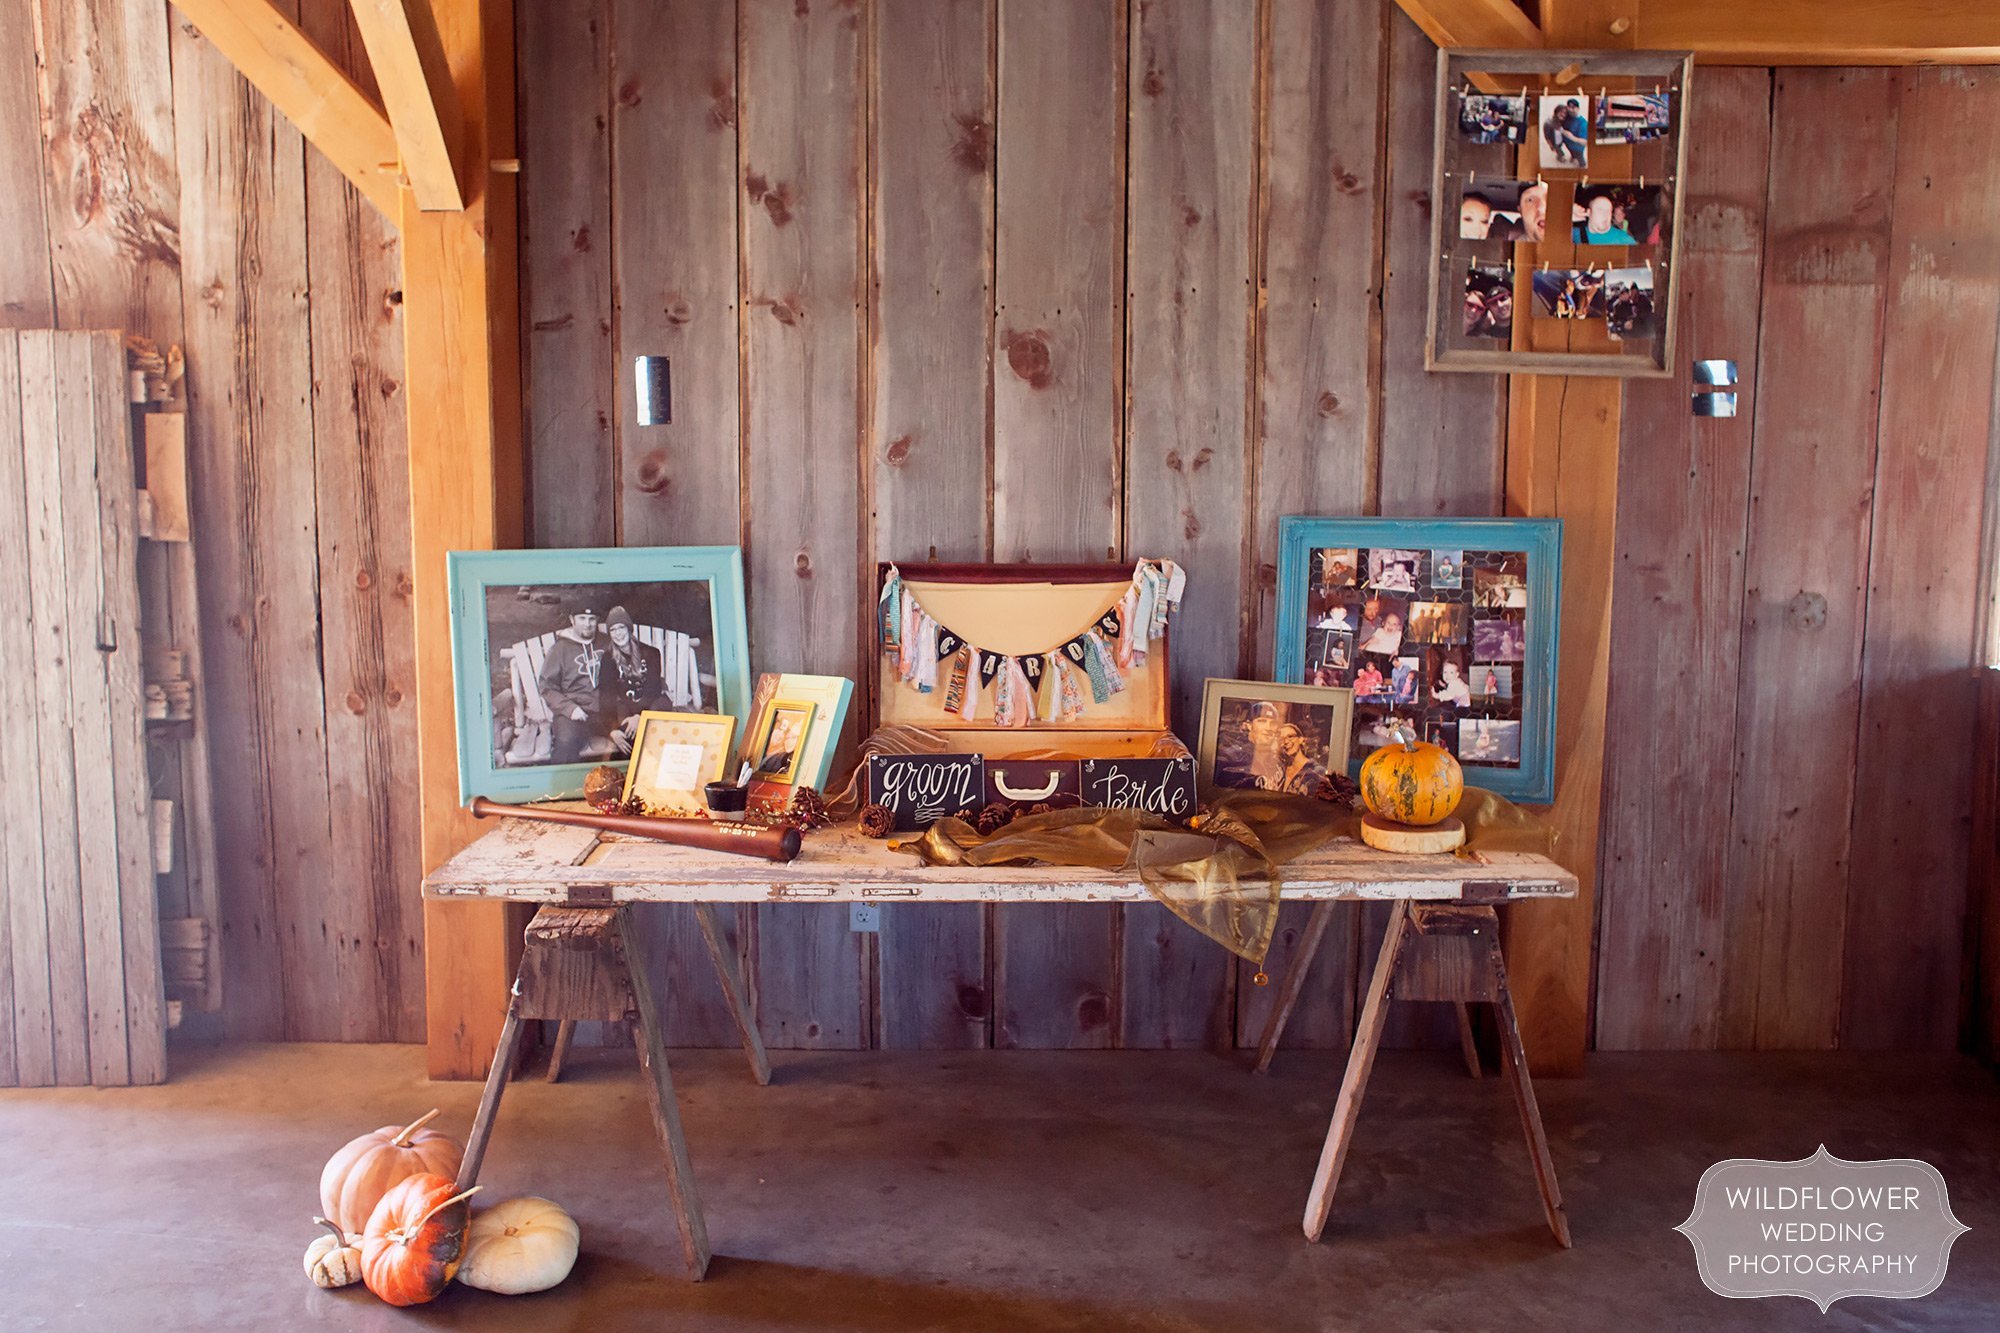 Simple and rustic sawhorse table for wedding gifts at this barn wedding at the Schwinn Produce Farm just north of KC.